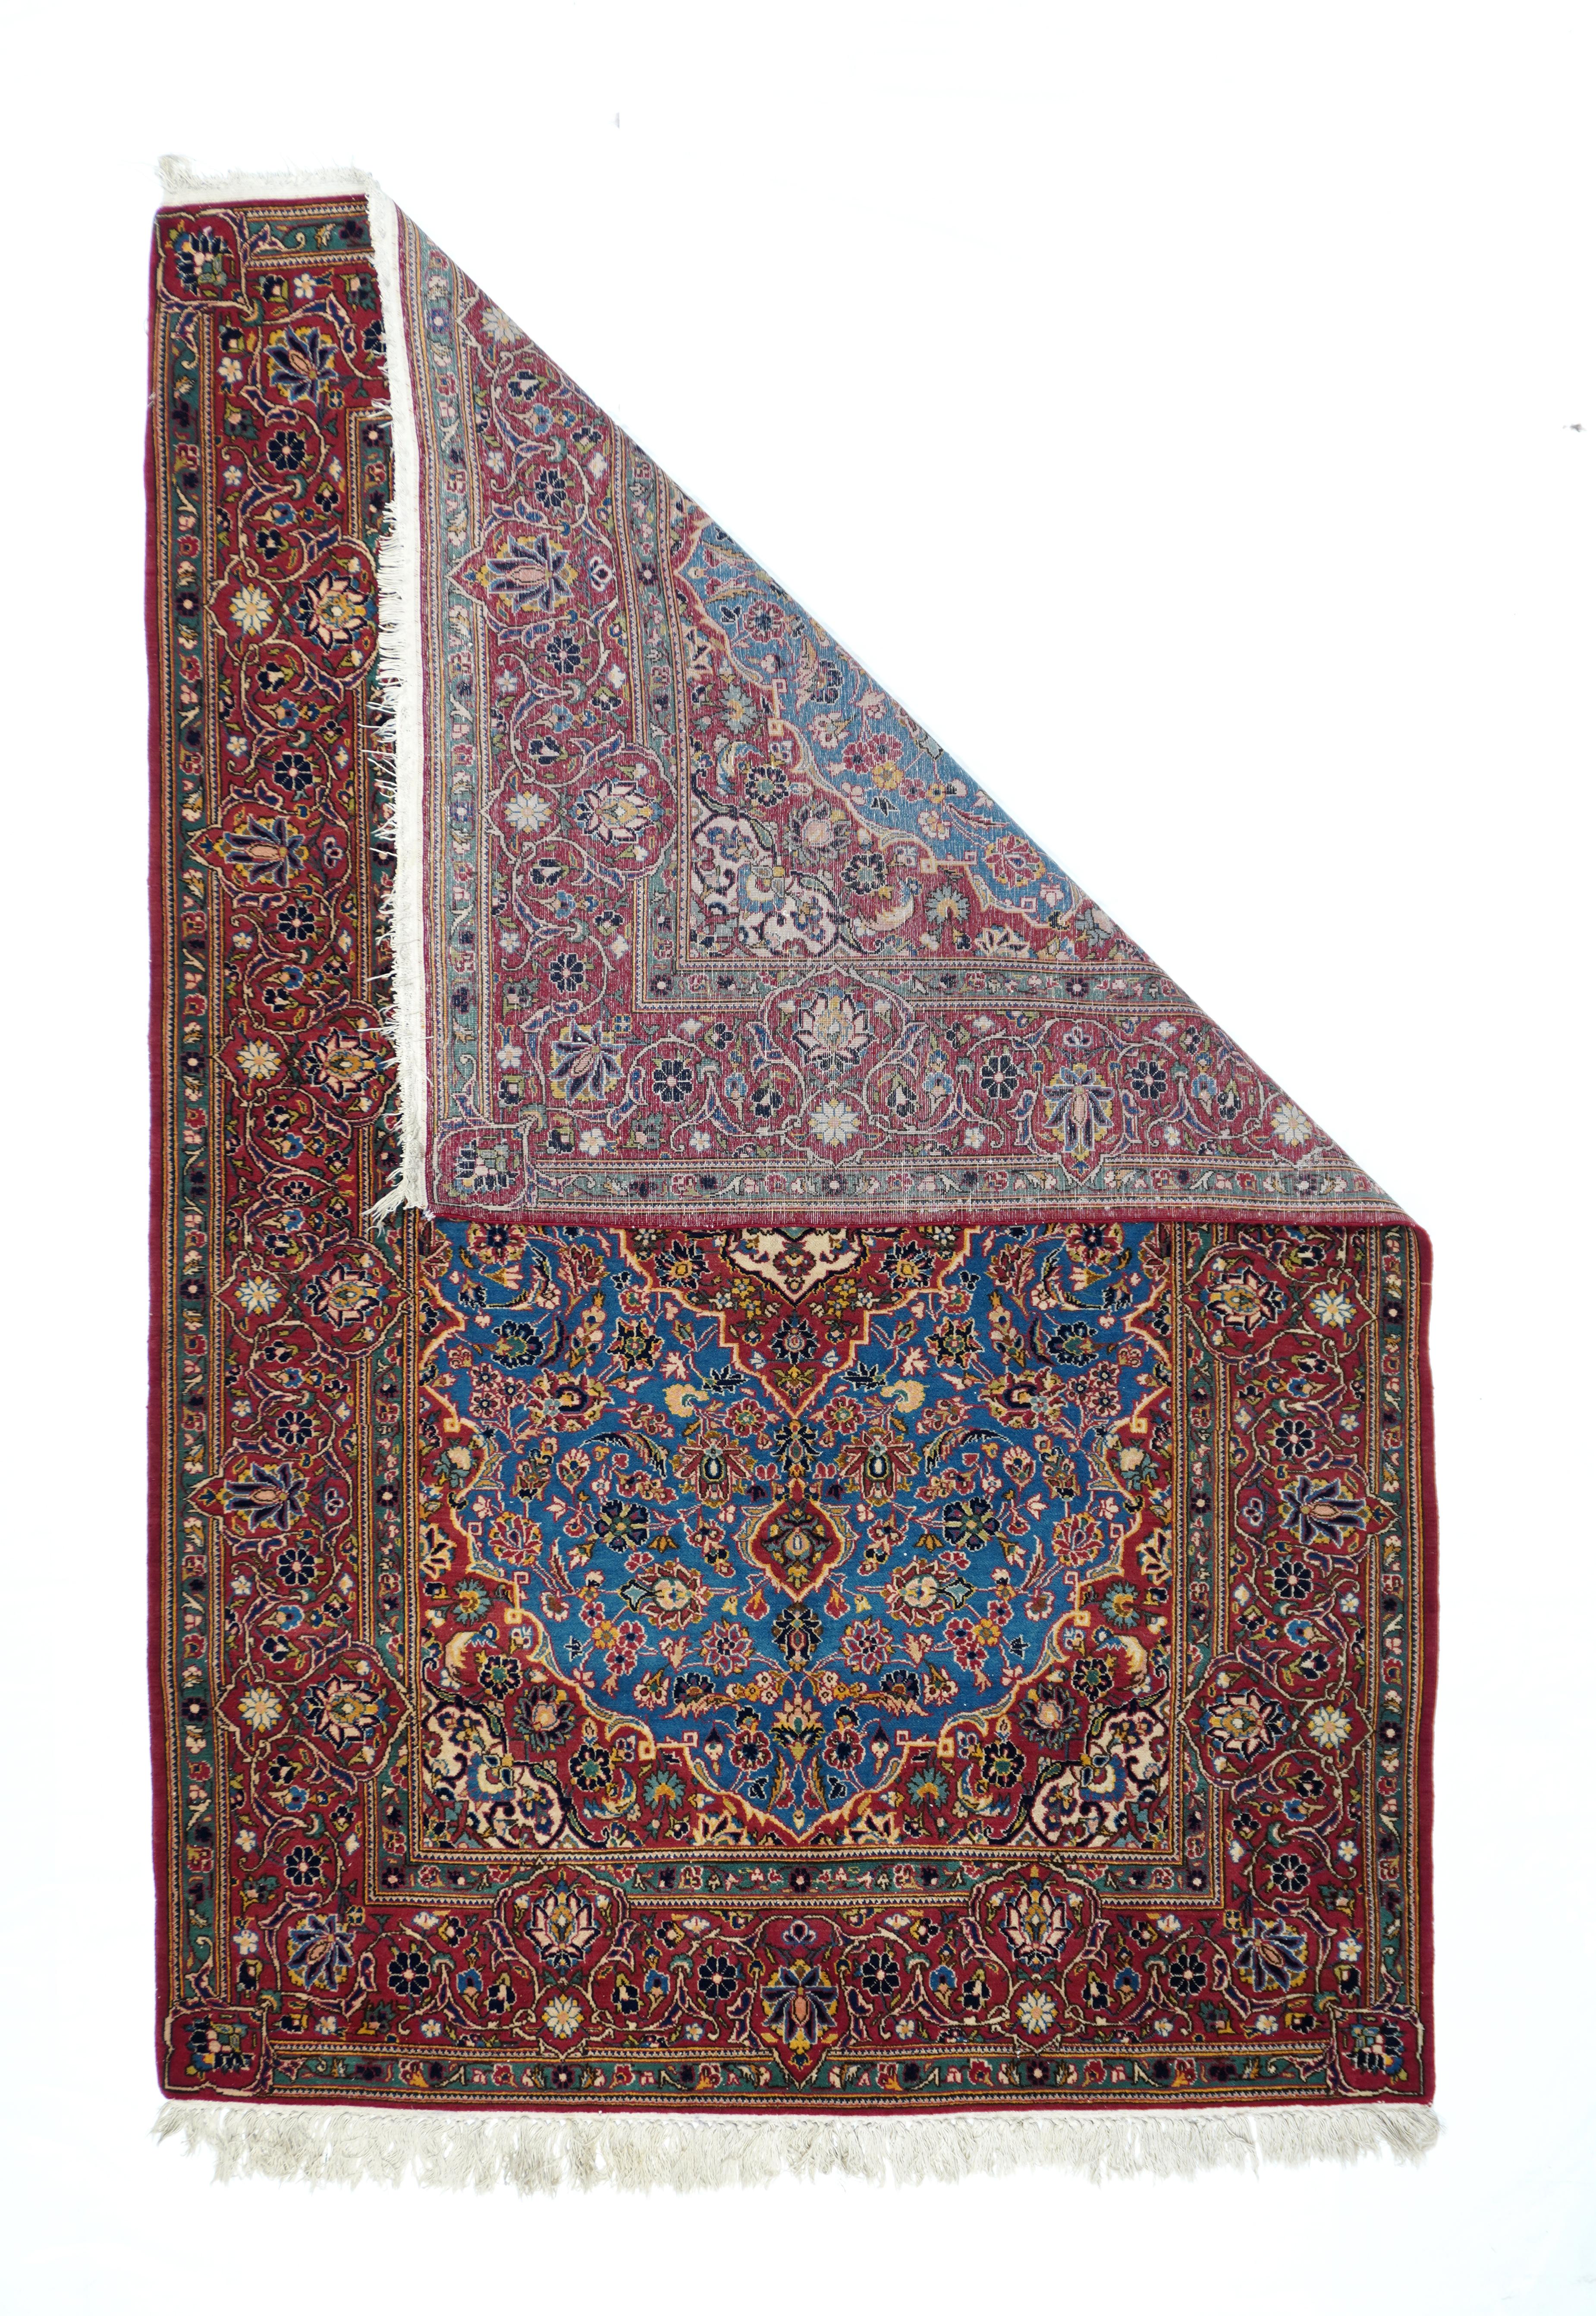 Vintage Kashan rug. Measures: 4.7'' x 6.10''. The attractive almost light blue field displays a pendanted red medallion and ivory sub-medallion with eight radiating arabesque palmettes, repeated on a larger overall scale in the extended corners. The